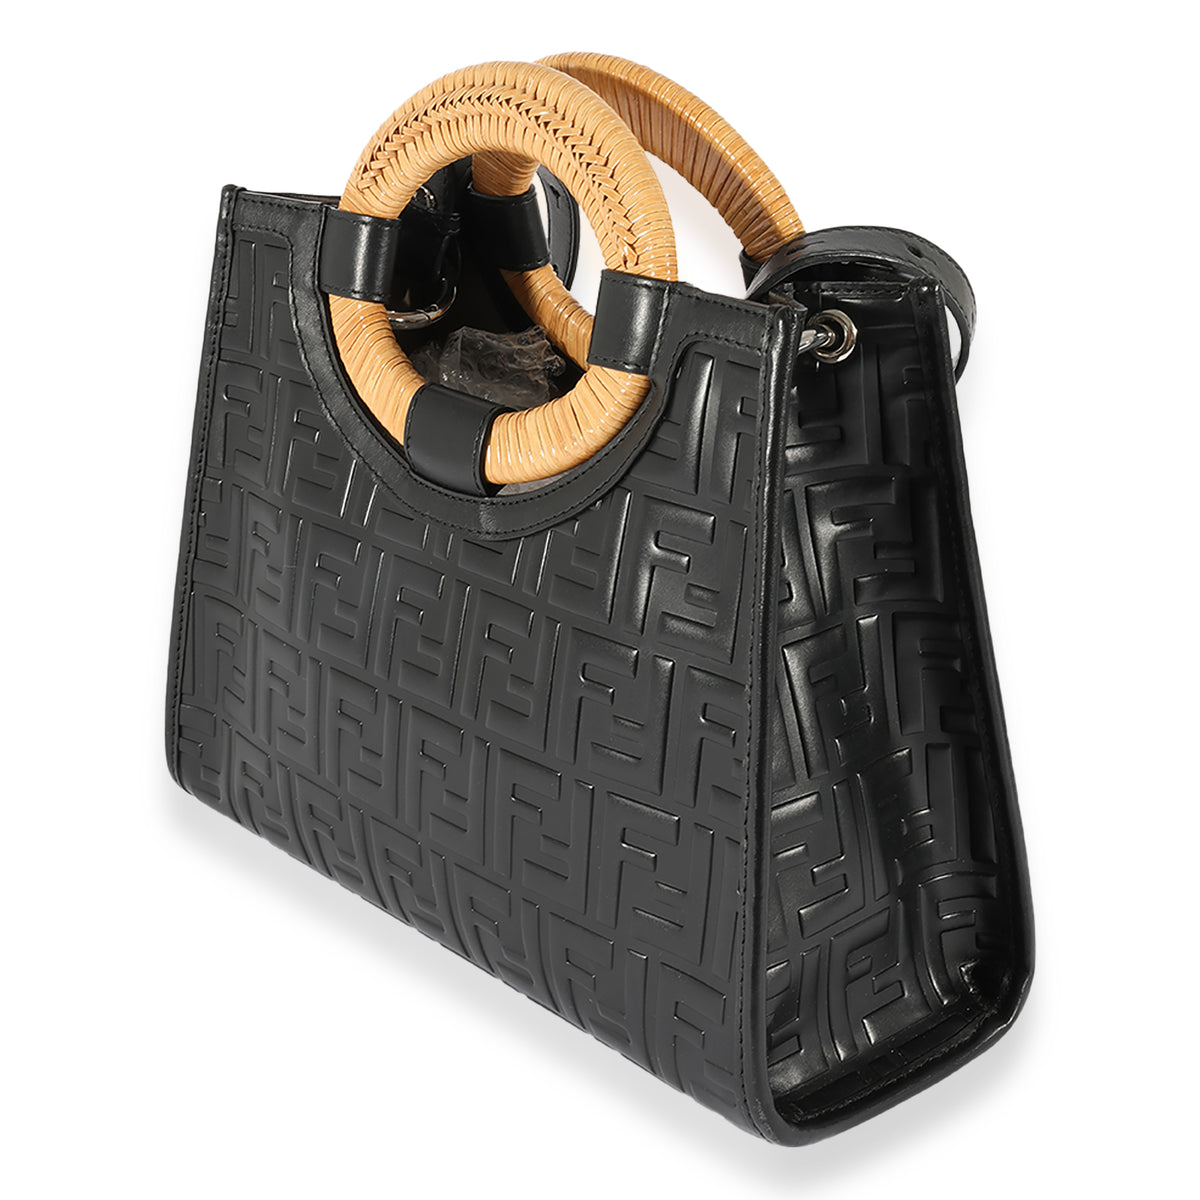 FENDI: By The Way Mini bag in raffia with all-over embroidered FF